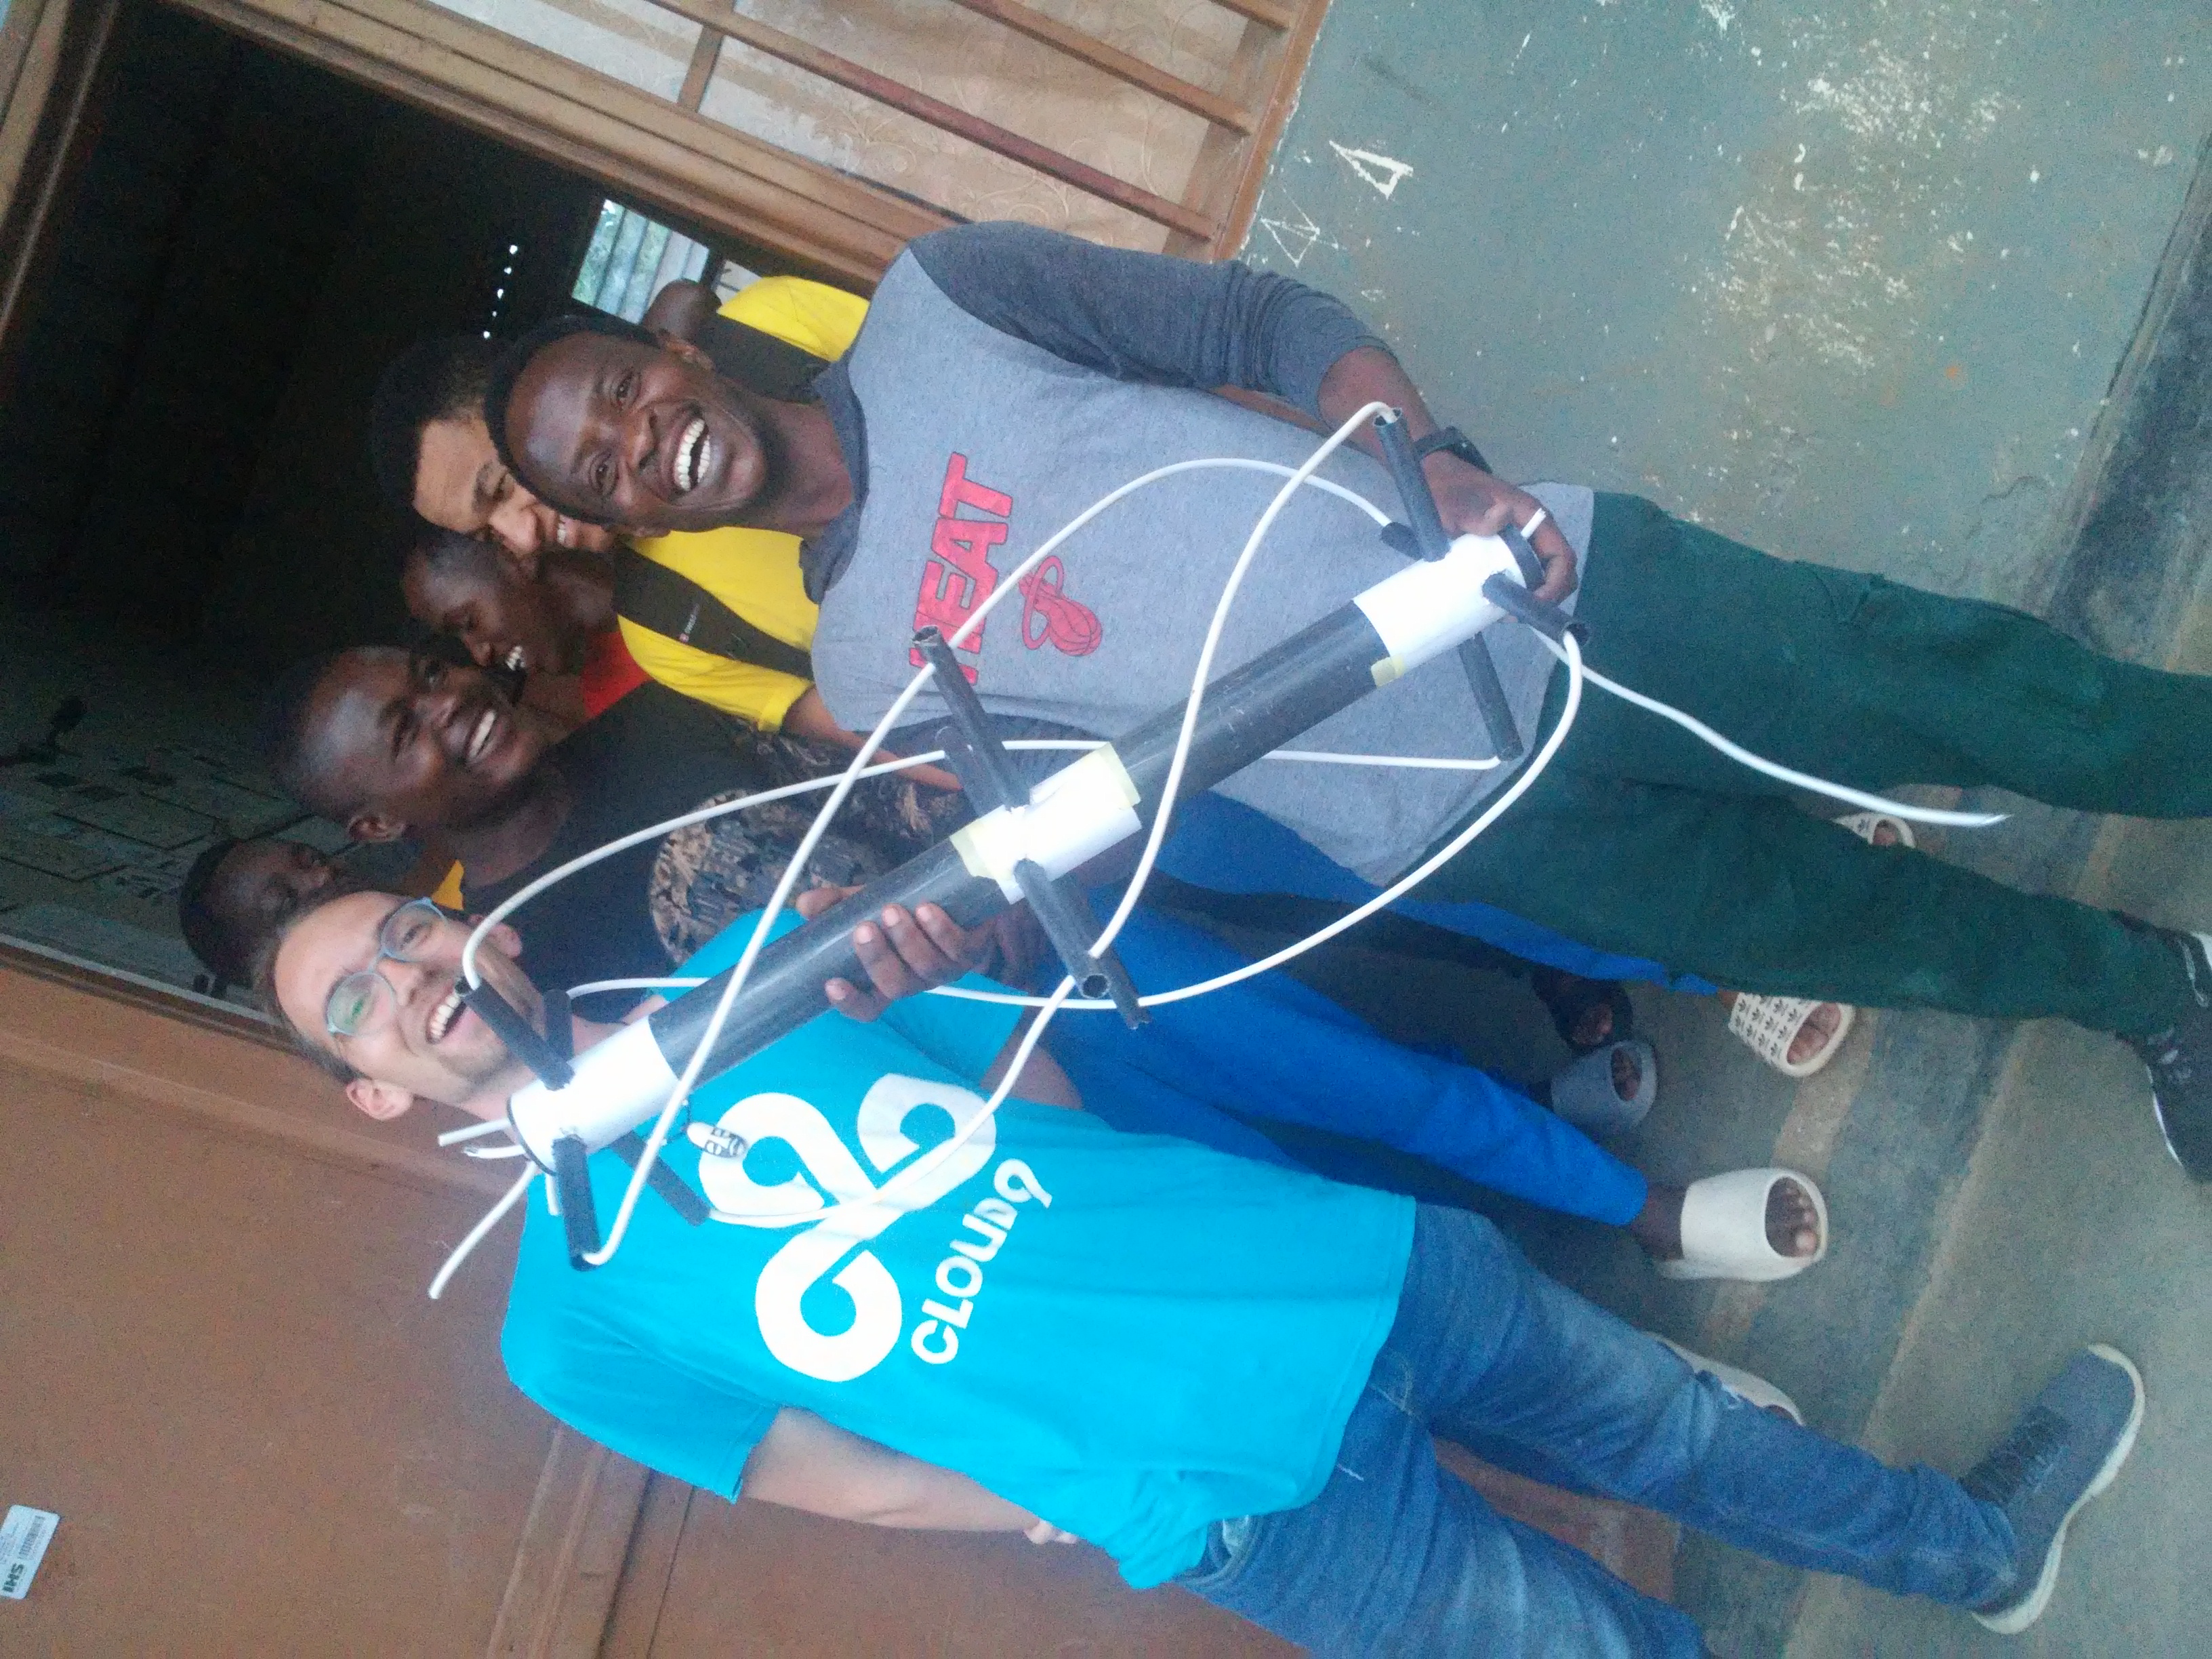 Leopold and me building the antenna with some students